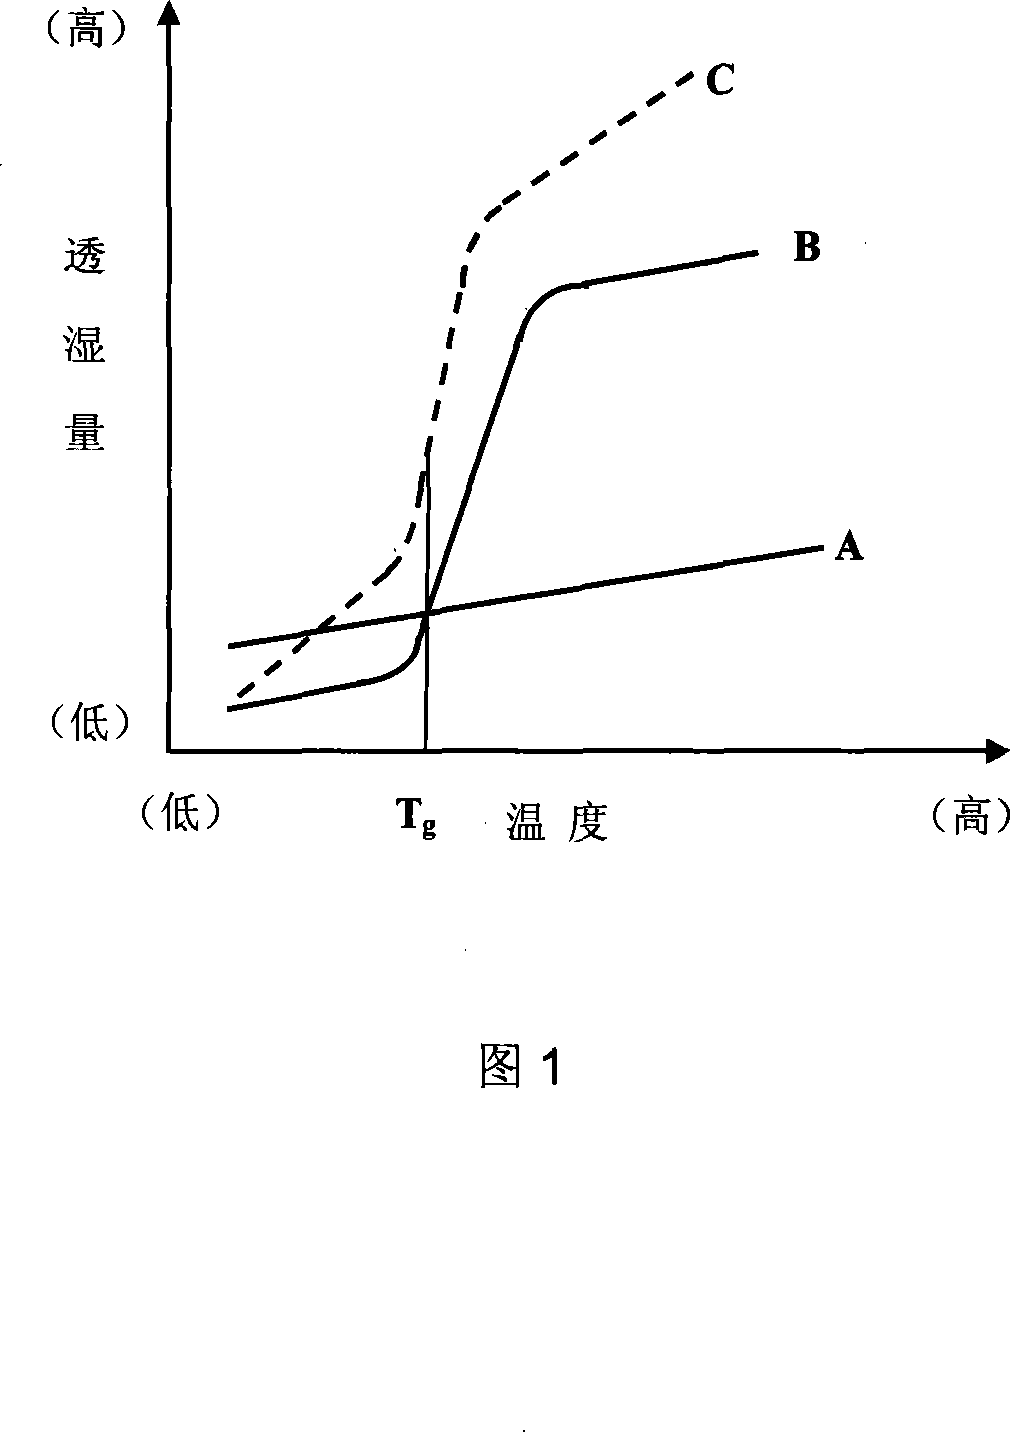 Preparation of moisture controllable polymer composite film and its application